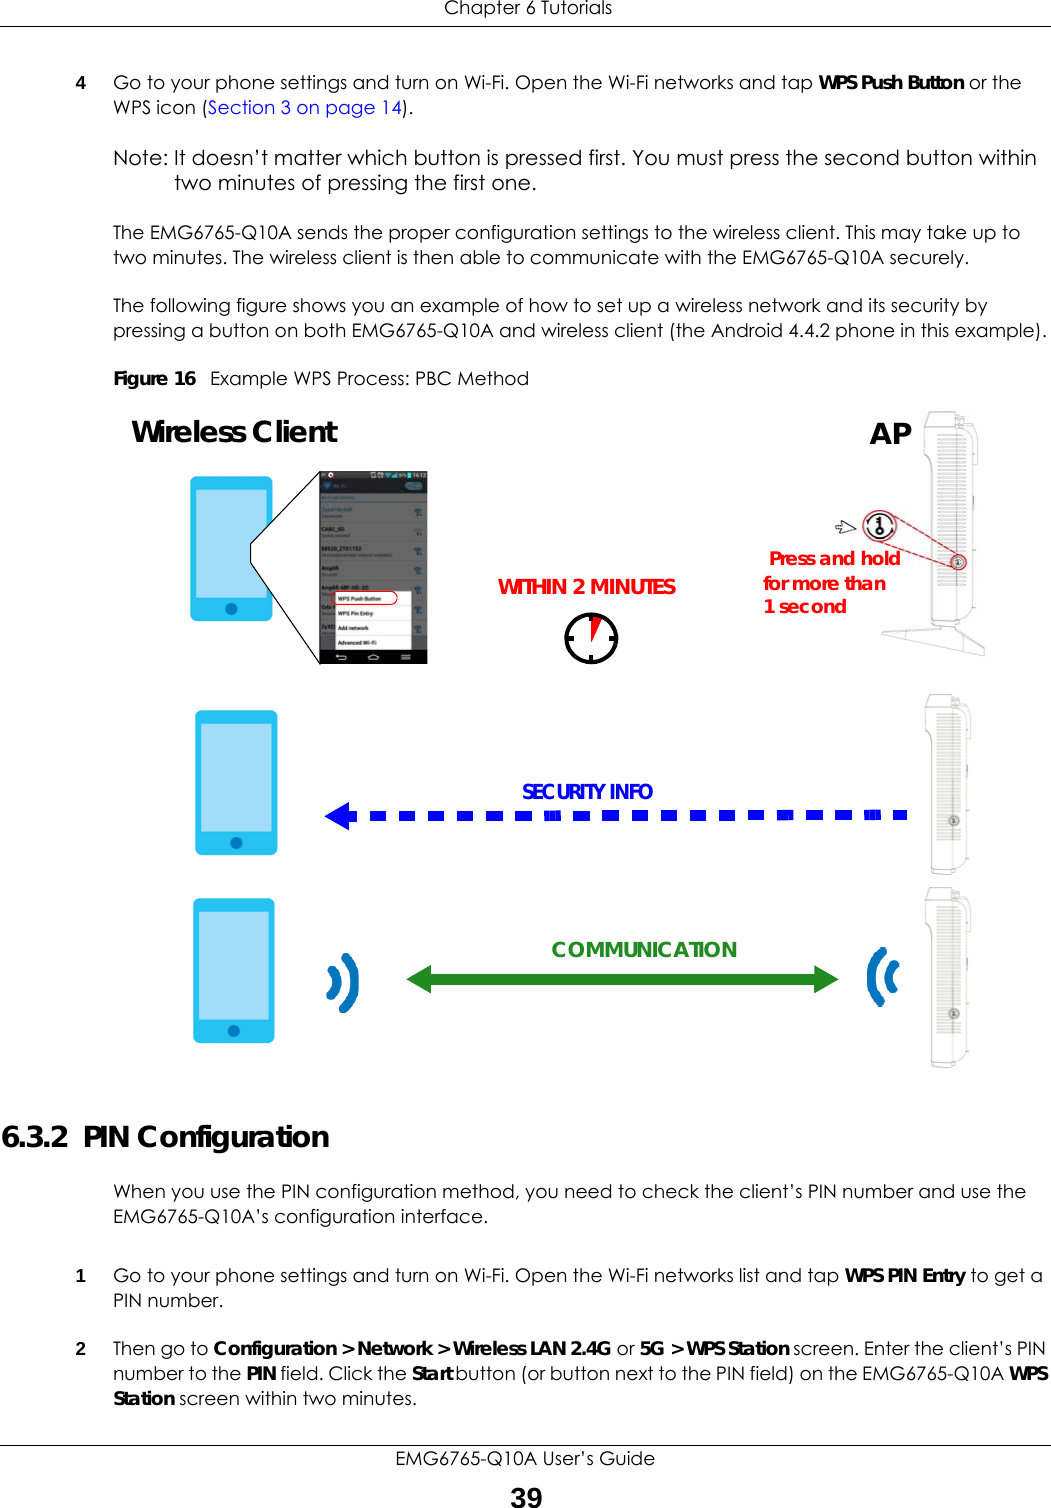  Chapter 6 TutorialsEMG6765-Q10A User’s Guide394Go to your phone settings and turn on Wi-Fi. Open the Wi-Fi networks and tap WPS Push Button or the WPS icon (Section 3 on page 14).Note: It doesn’t matter which button is pressed first. You must press the second button within two minutes of pressing the first one. The EMG6765-Q10A sends the proper configuration settings to the wireless client. This may take up to two minutes. The wireless client is then able to communicate with the EMG6765-Q10A securely.The following figure shows you an example of how to set up a wireless network and its security by pressing a button on both EMG6765-Q10A and wireless client (the Android 4.4.2 phone in this example).Figure 16   Example WPS Process: PBC Method6.3.2  PIN ConfigurationWhen you use the PIN configuration method, you need to check the client’s PIN number and use the EMG6765-Q10A’s configuration interface.1Go to your phone settings and turn on Wi-Fi. Open the Wi-Fi networks list and tap WPS PIN Entry to get a PIN number.2Then go to Configuration &gt; Network &gt; Wireless LAN 2.4G or 5G &gt; WPS Station screen. Enter the client’s PIN number to the PIN field. Click the Start button (or button next to the PIN field) on the EMG6765-Q10A WPS Station screen within two minutes.Wireless ClientSECURITY INFOCOMMUNICATIONWITHIN 2 MINUTESAPPress and holdfor more than1 second